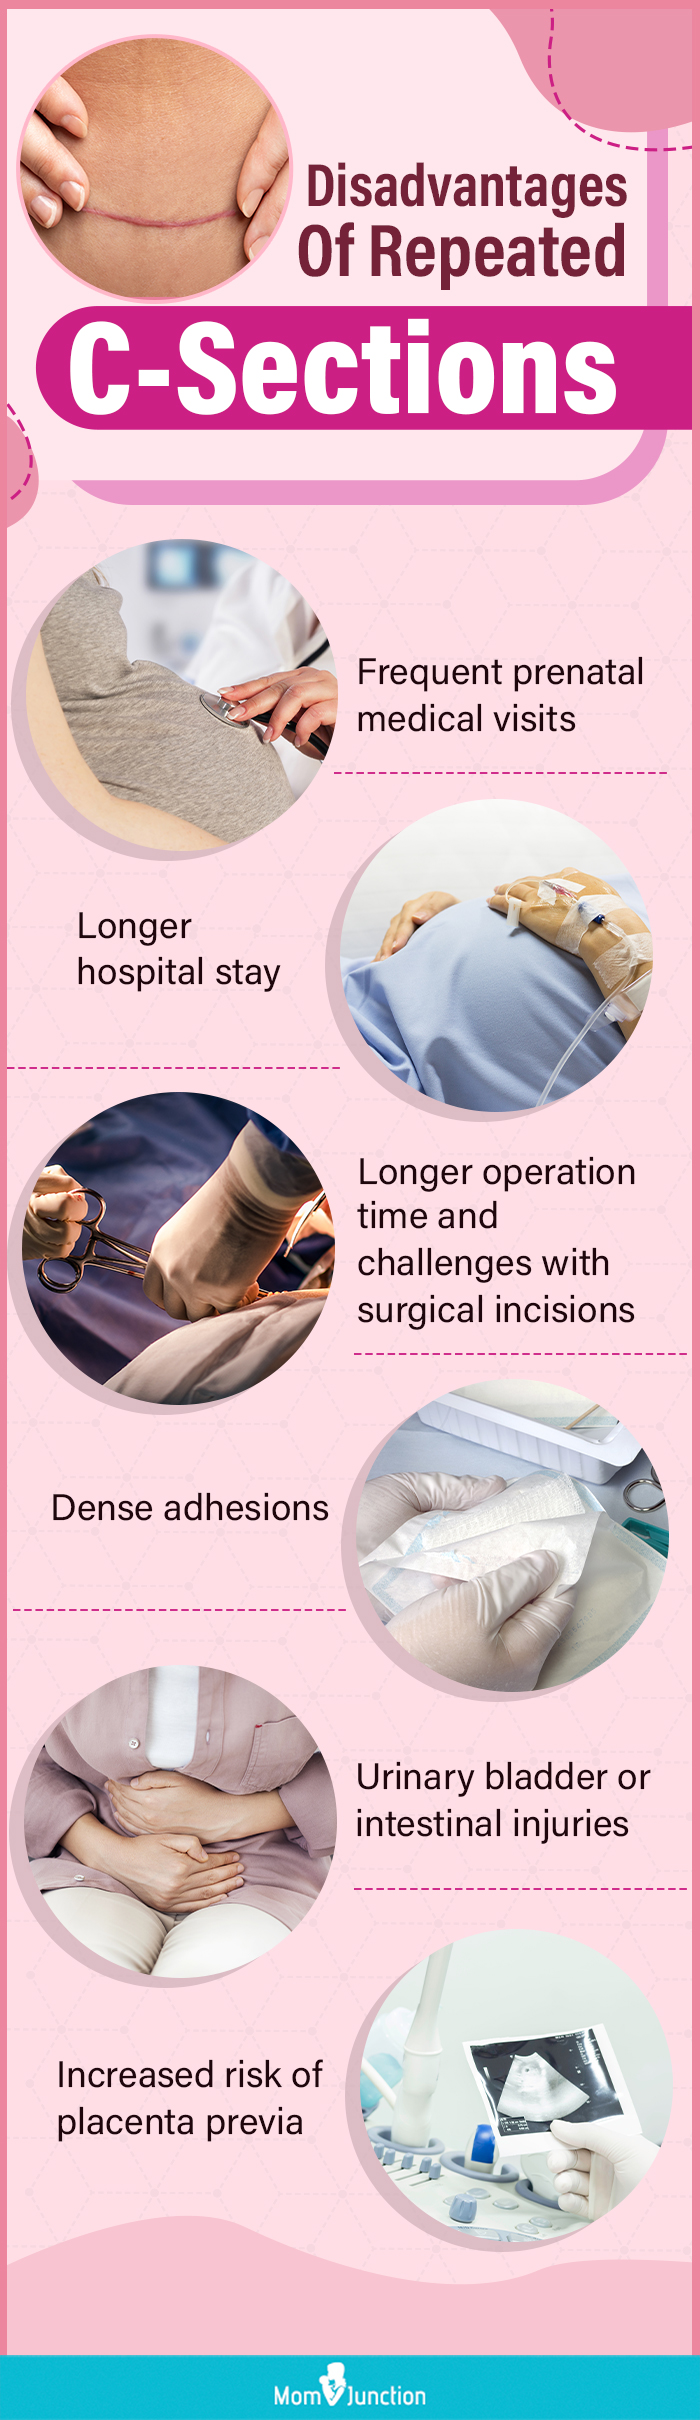 disadvantages of repeated c sections (infographic)